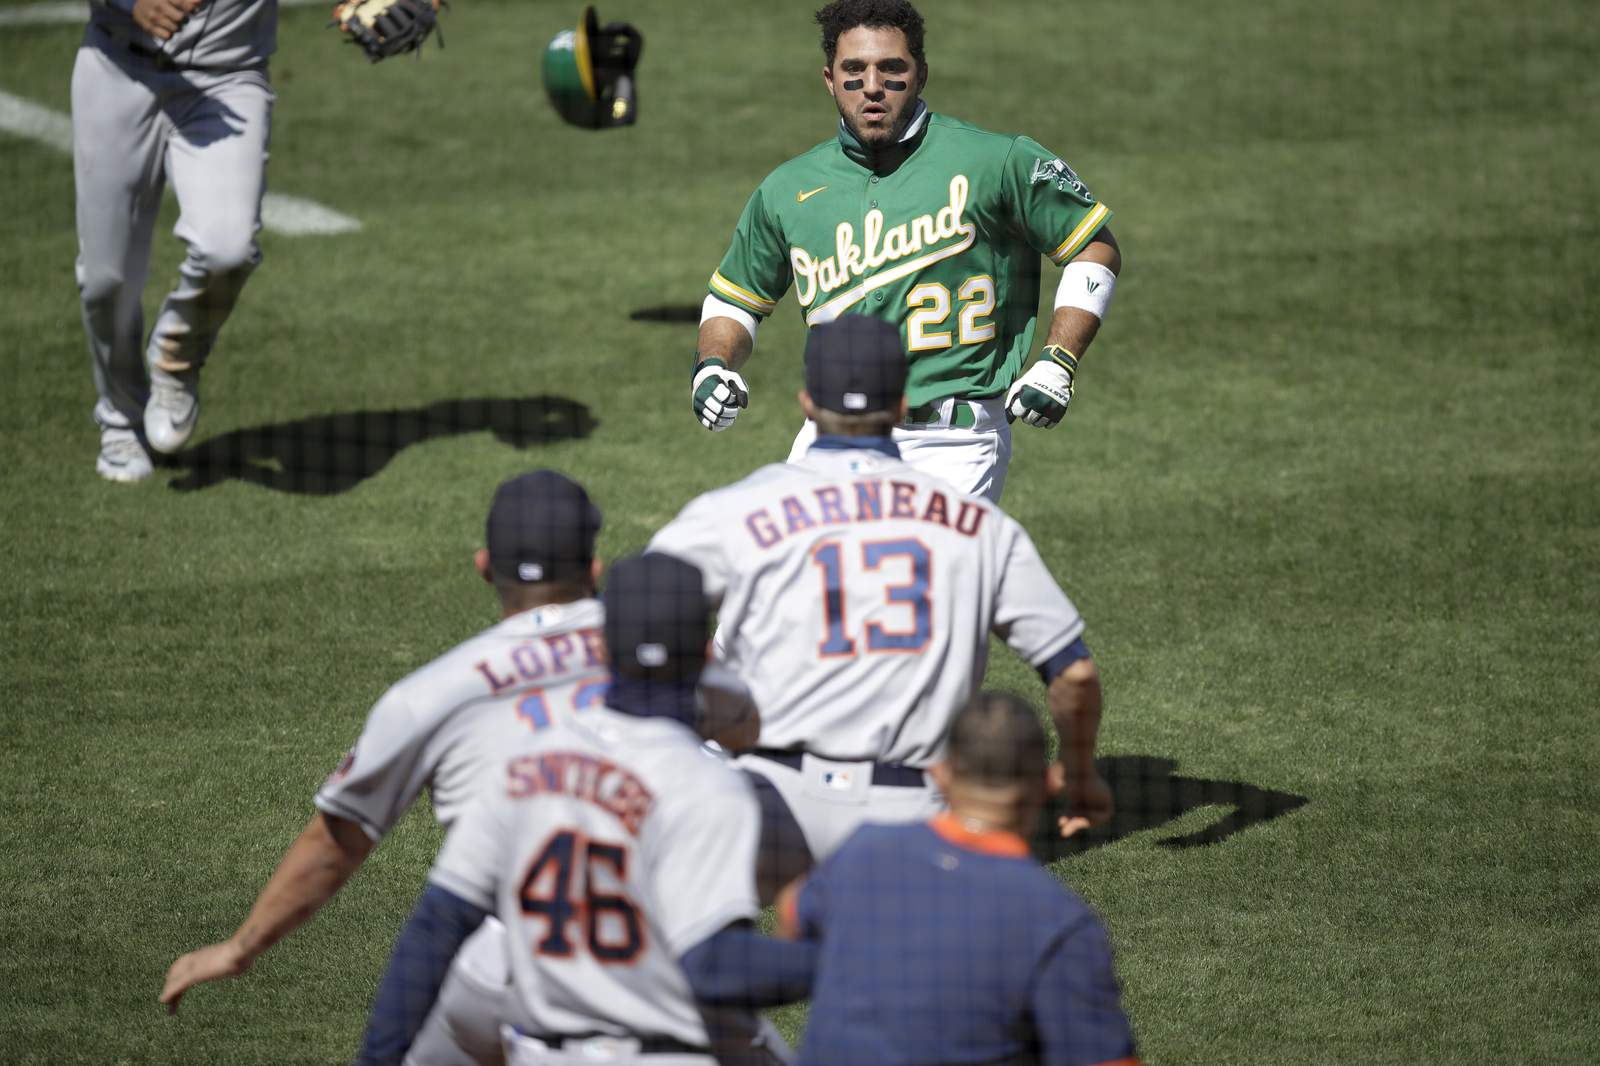 Oaklands Laureano says Astros coach insulted mother, sparking bench-clearing ruckus Sunday